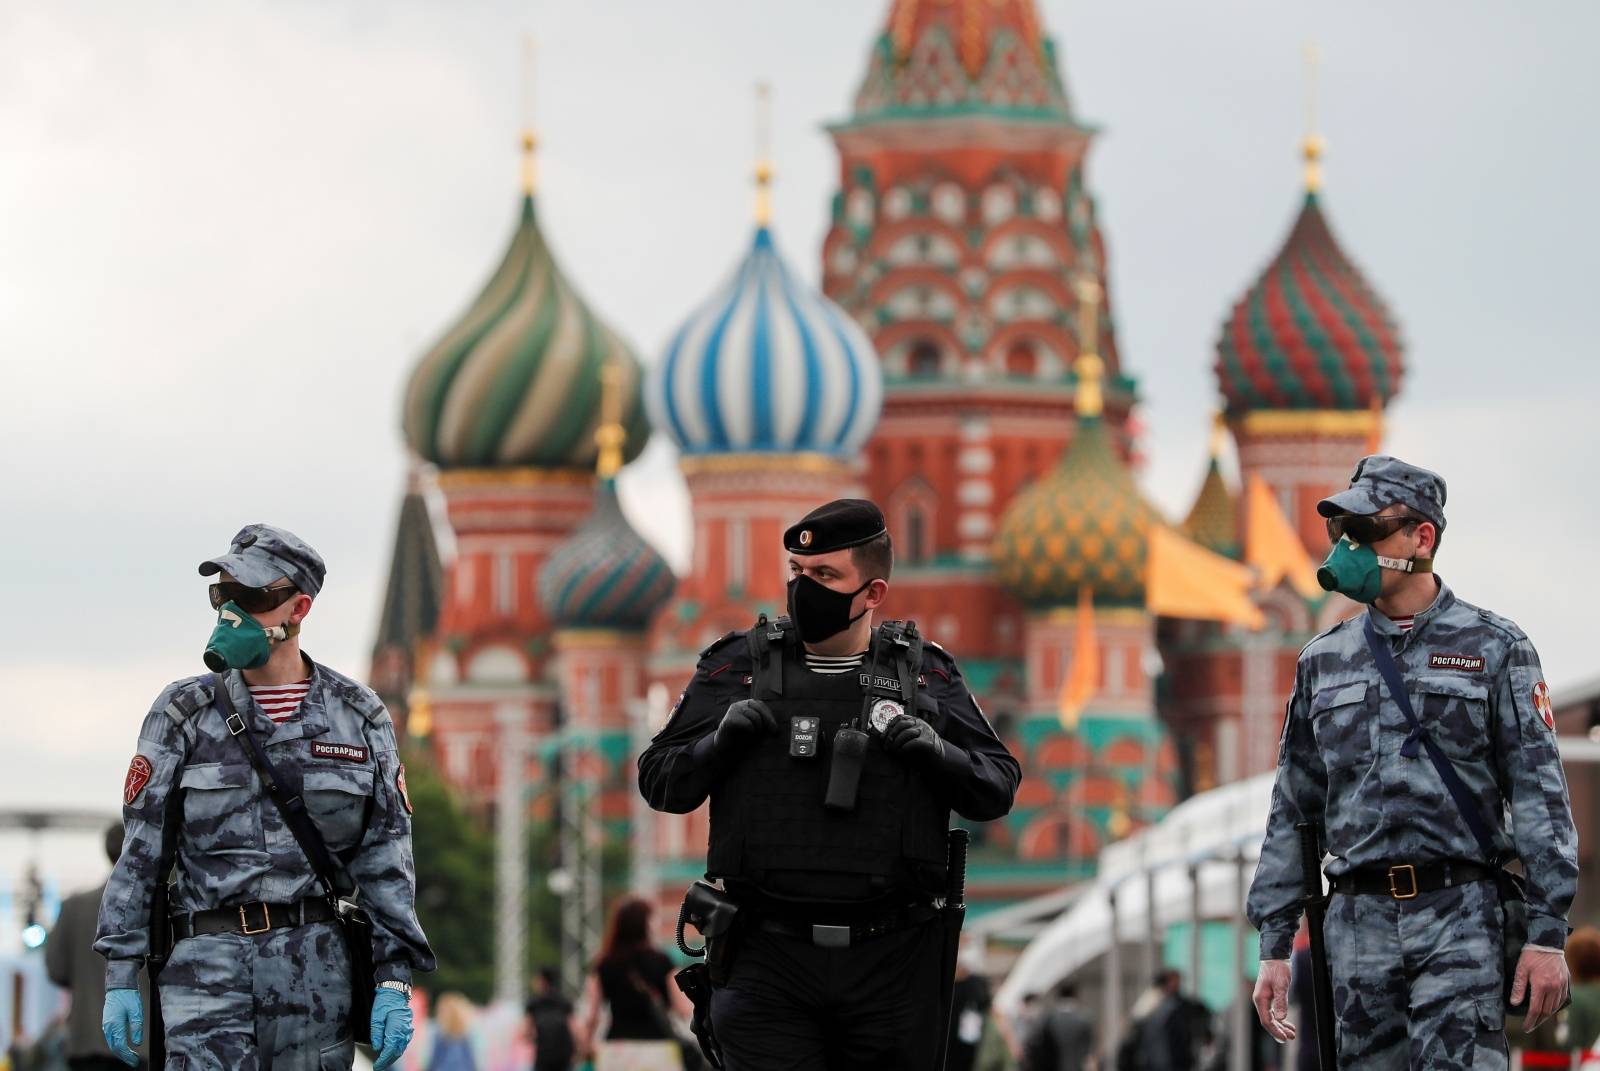 Russian law enforcement officers work at the annual Red Square Book Fair in central Moscow